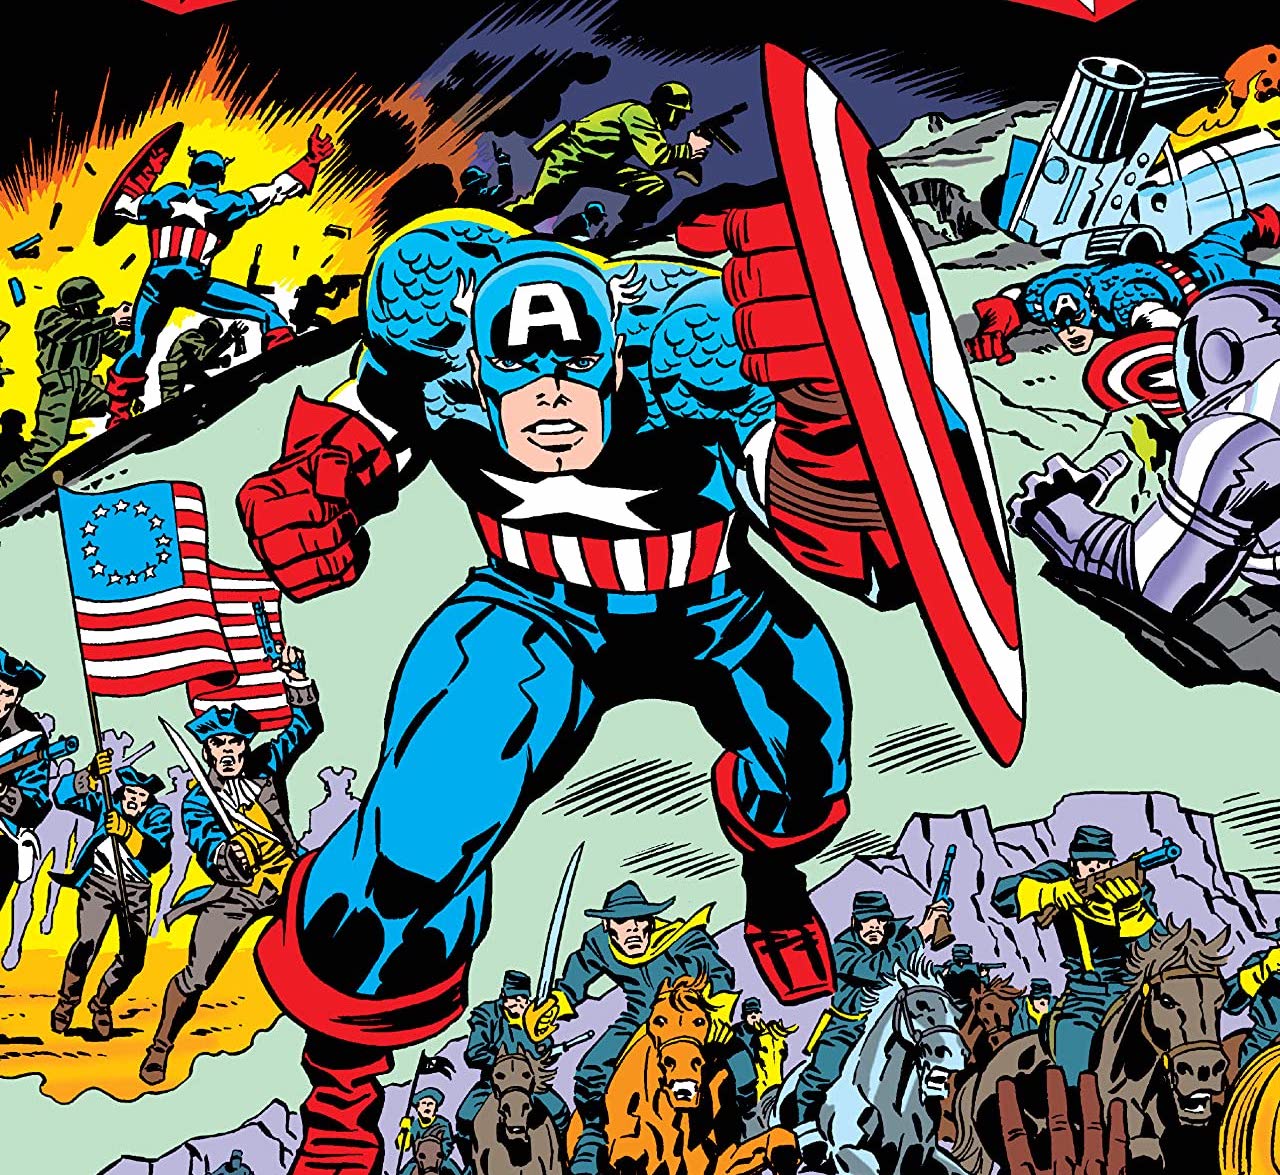 Celebrate the Fourth of July with 'Captain America's Bicentennial Battles Treasury Edition'